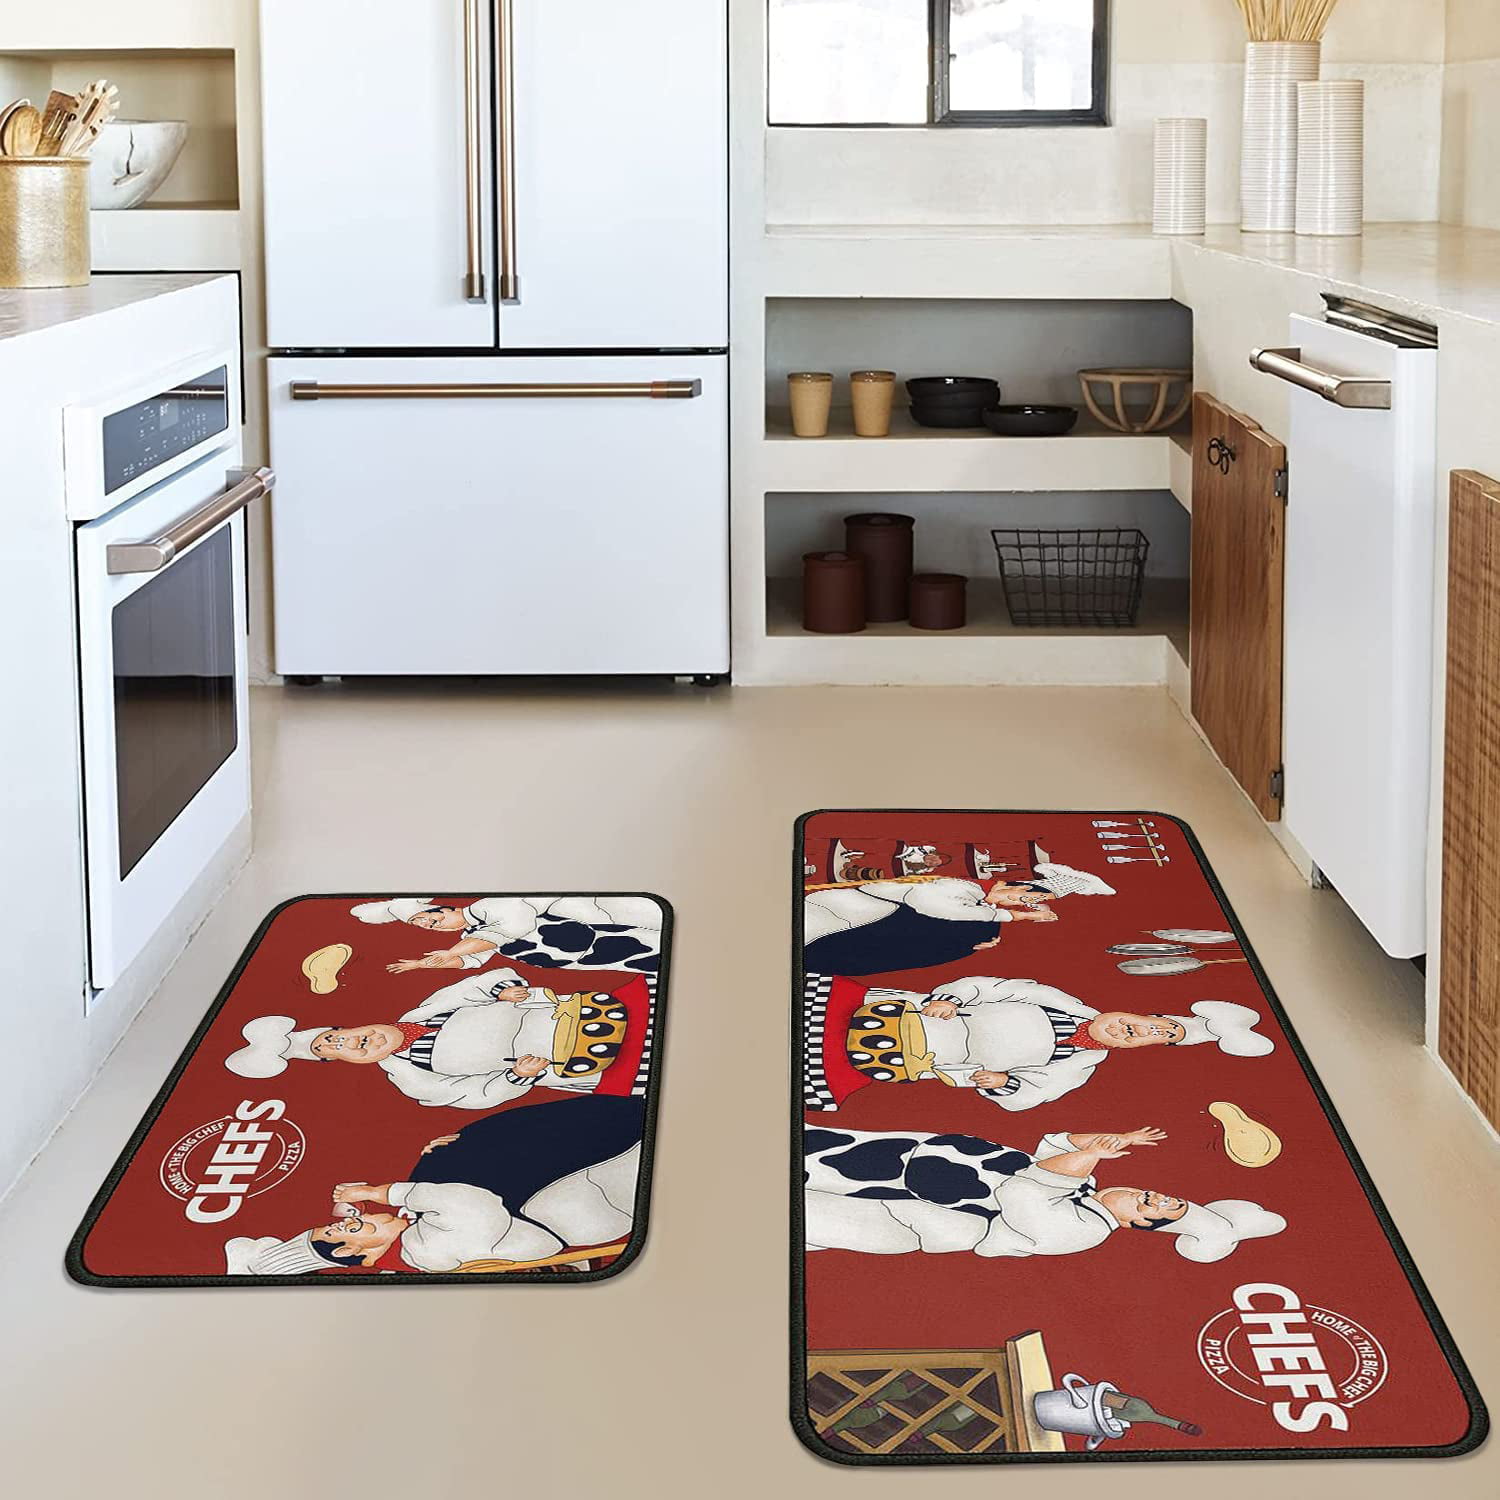  PRUKIVRA Kitchen Rugs and Mats,Non Skid Washable,Chef in Red  Background,Set of 2,Anti-Fatigue Comfort Standing Mat for Floor, Office,  Sink, Laundry(17x52+17x26) : Home & Kitchen